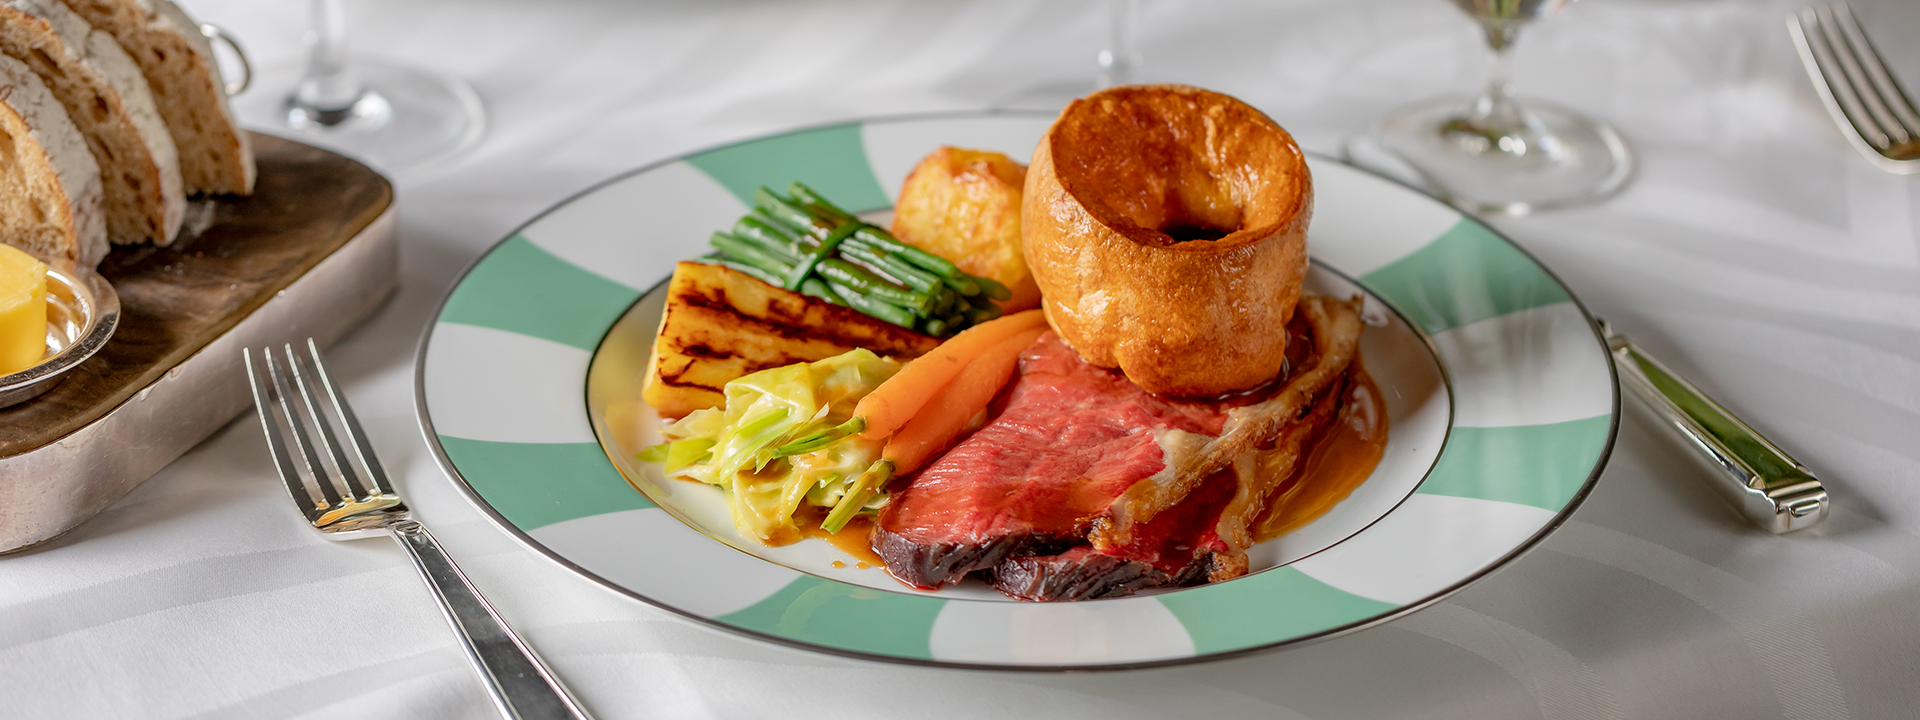 Perfectly golden roast potatoes and roast beef can be ordered in The Foyer and Reading Room.